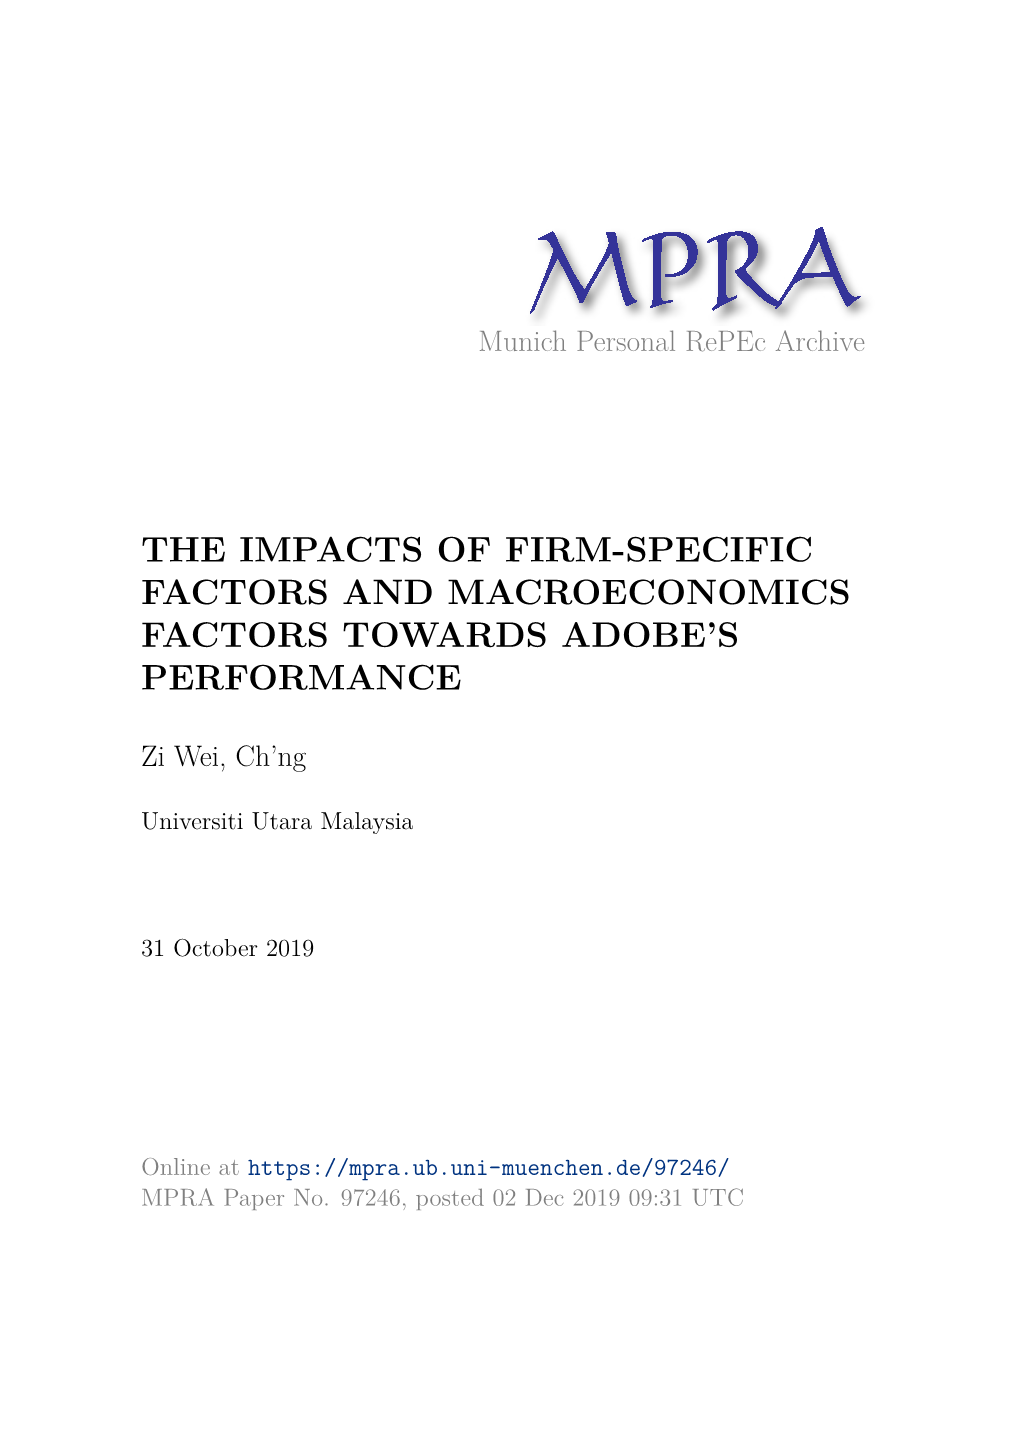 The Impacts of Firm-Specific Factors and Macroeconomics Factors Towards Adobe's Performance